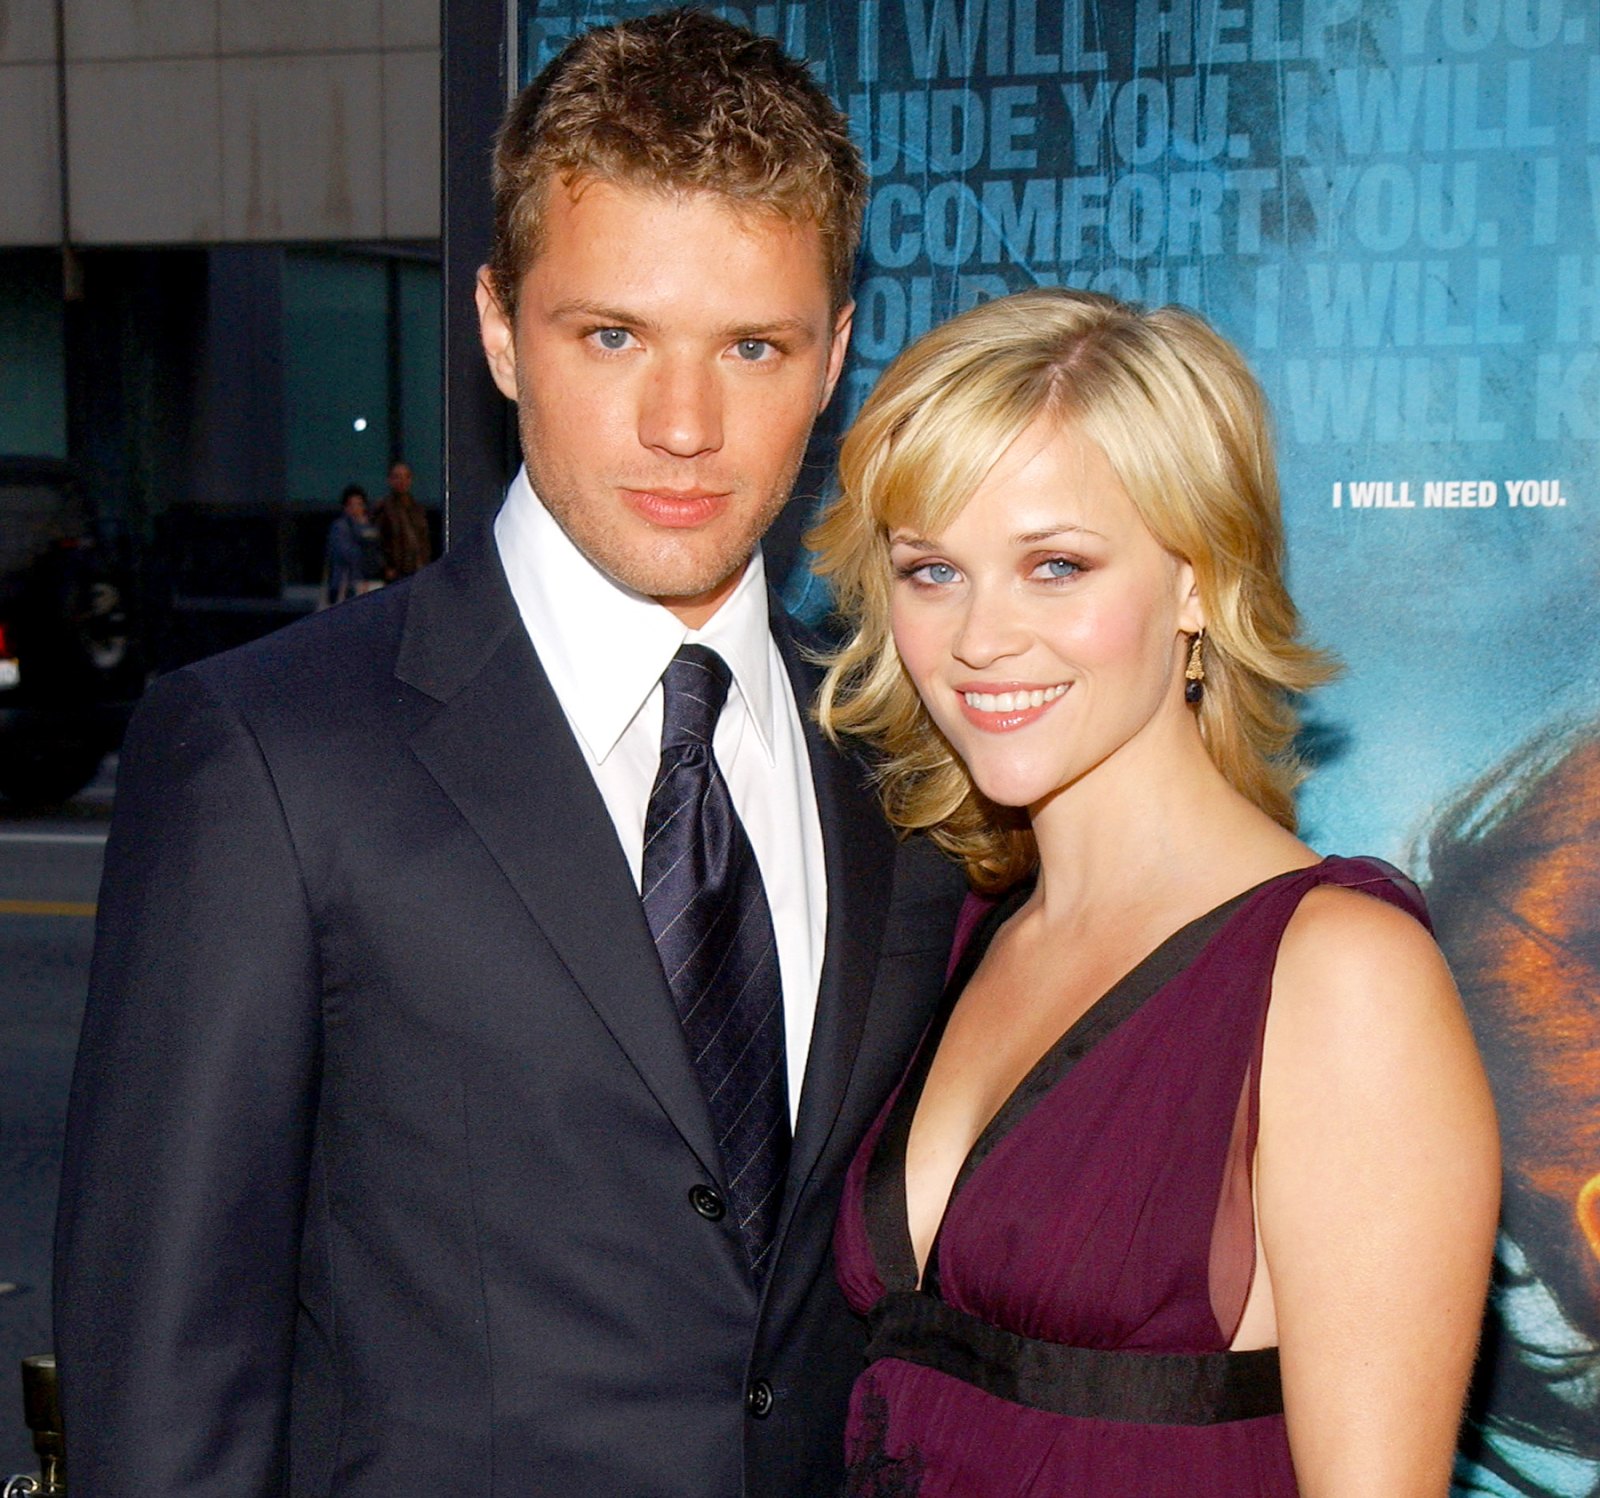 1398679927_105429306_ryan phillippe reese witherspoon zoom